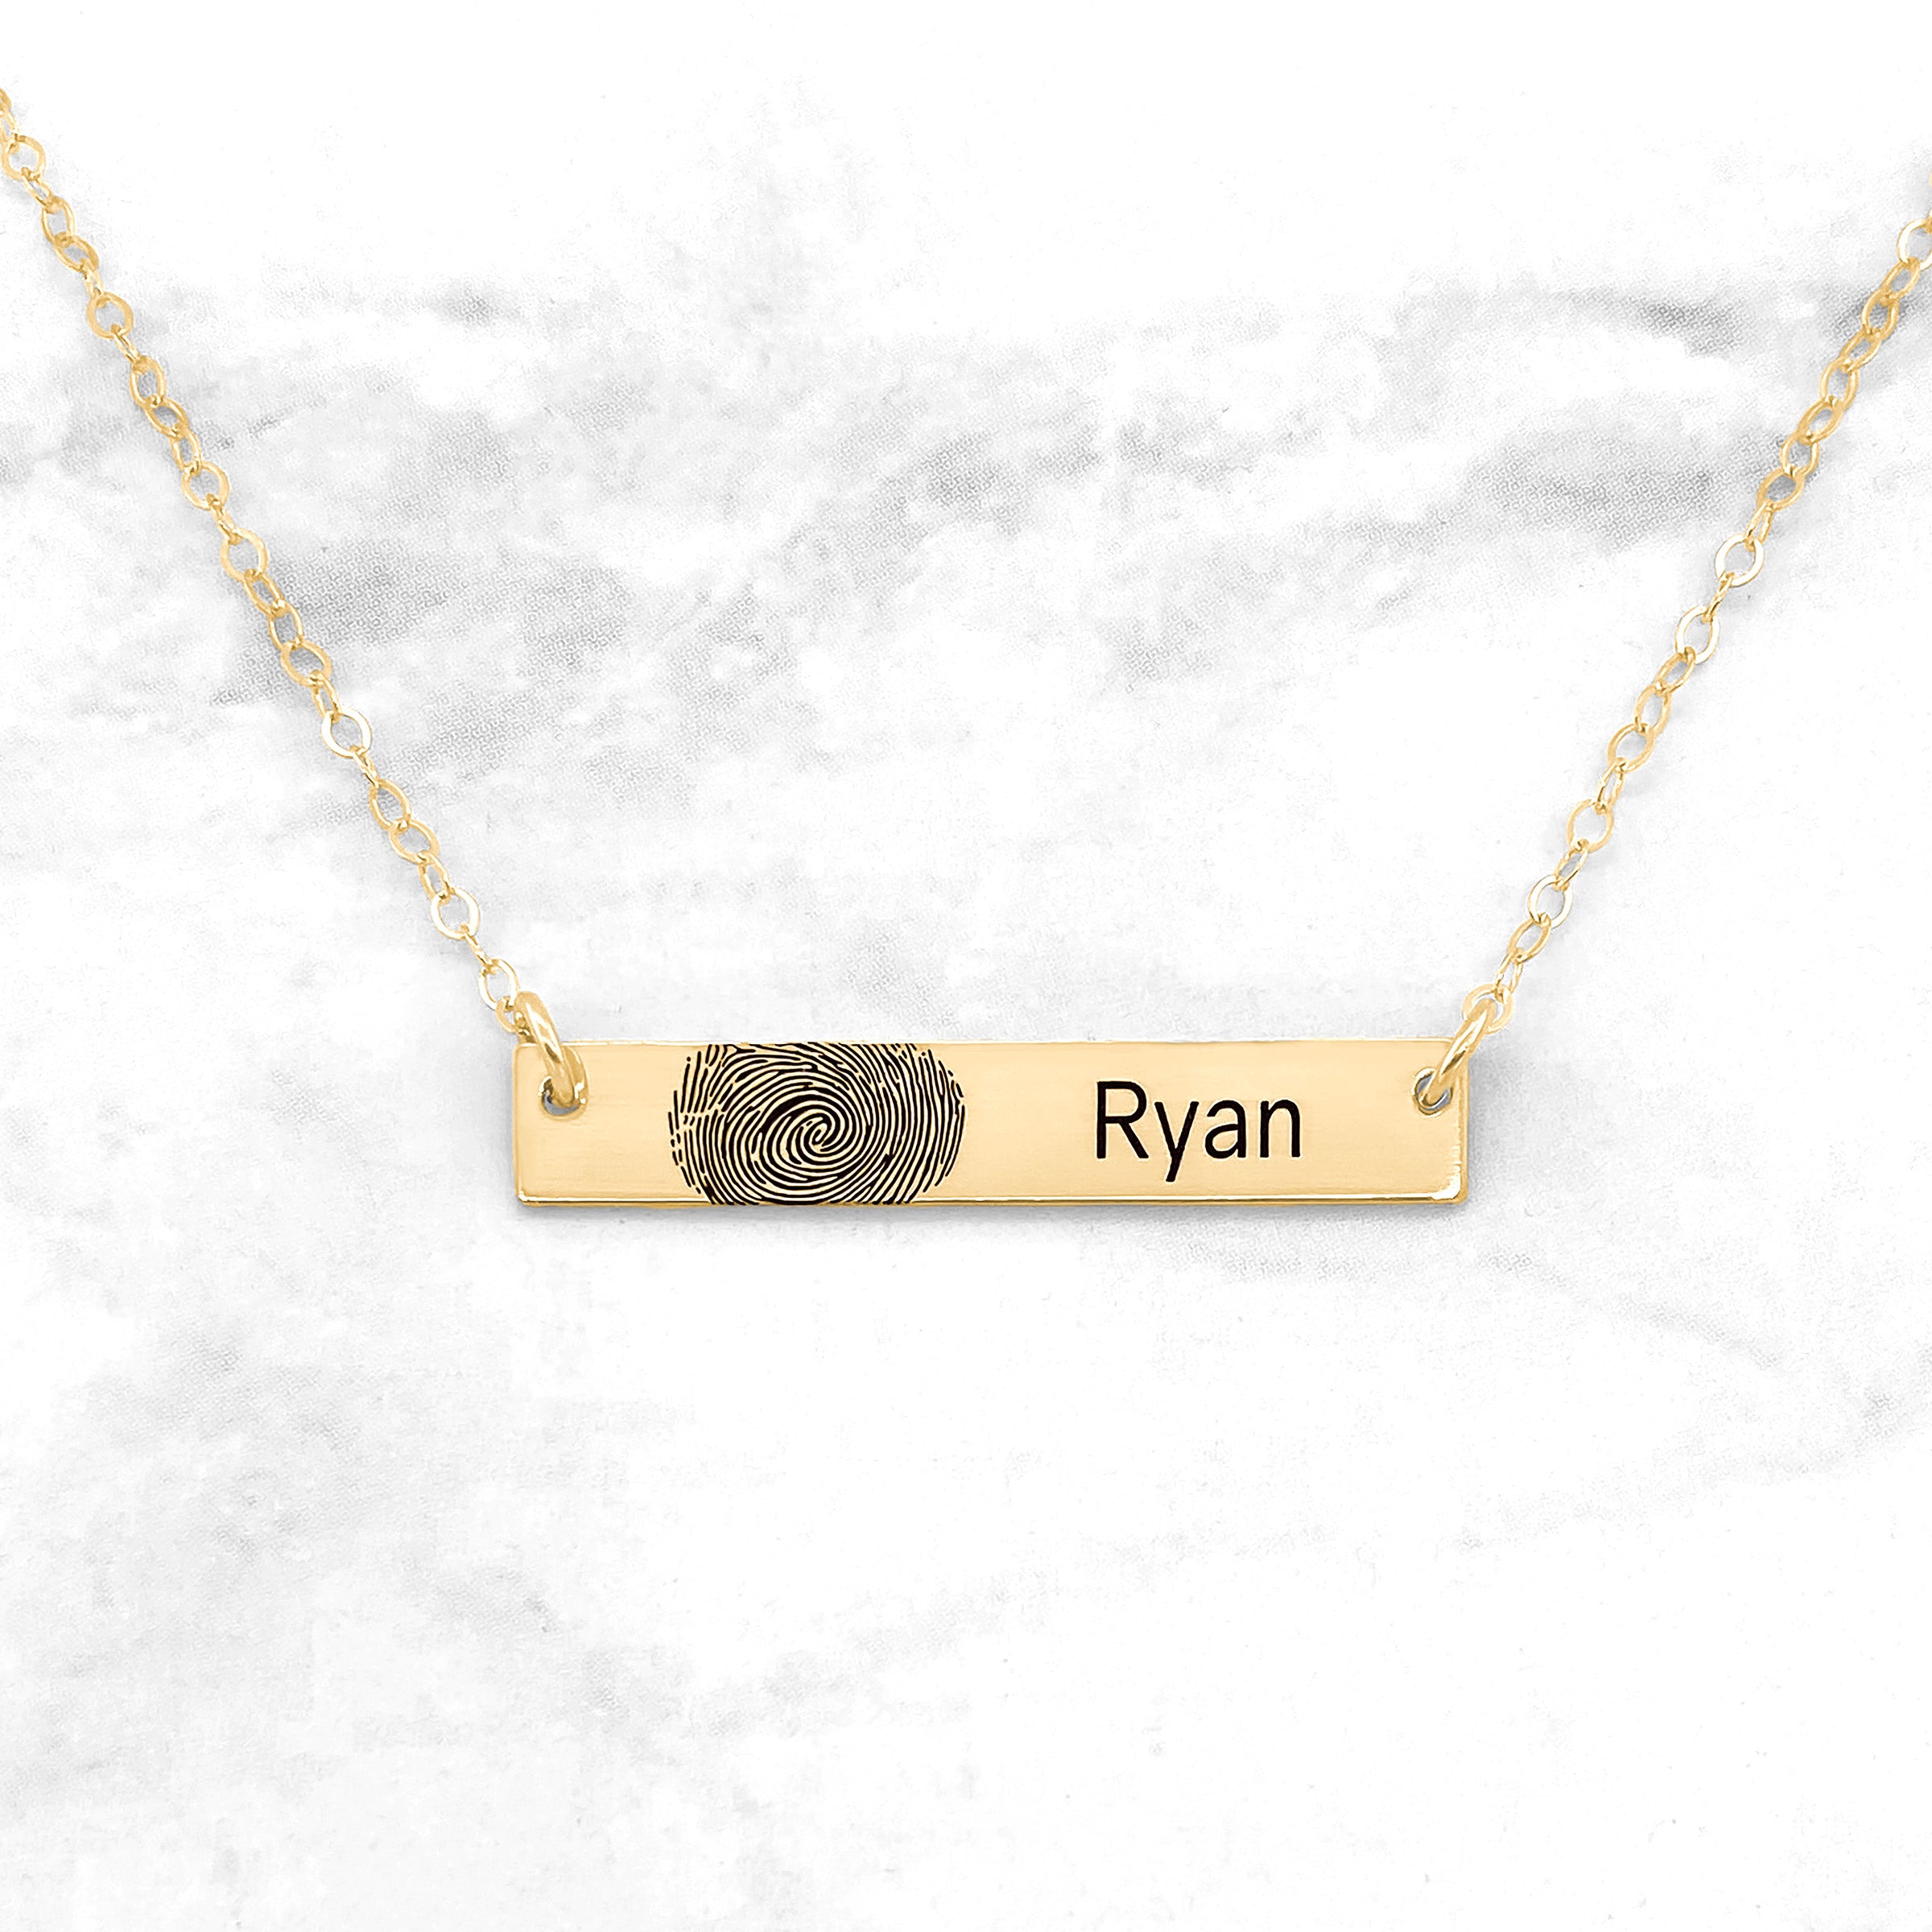 Double sided actual fingerprint necklace in sterling silver or 14k yellow  gold filled - personalized memorial remembrance jewelry